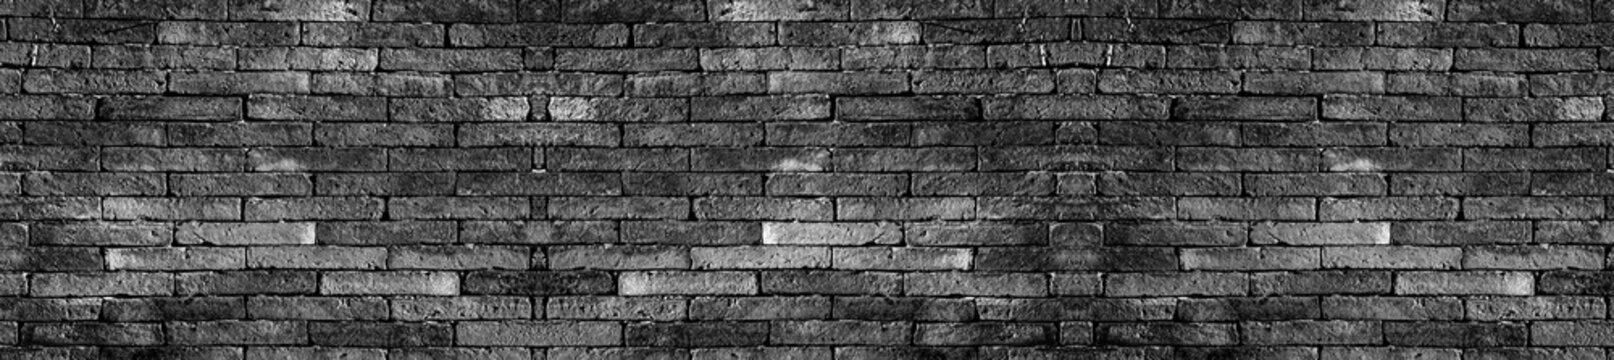 Panorama black brick wall. The texture black stone blocks. Abstract background for design.